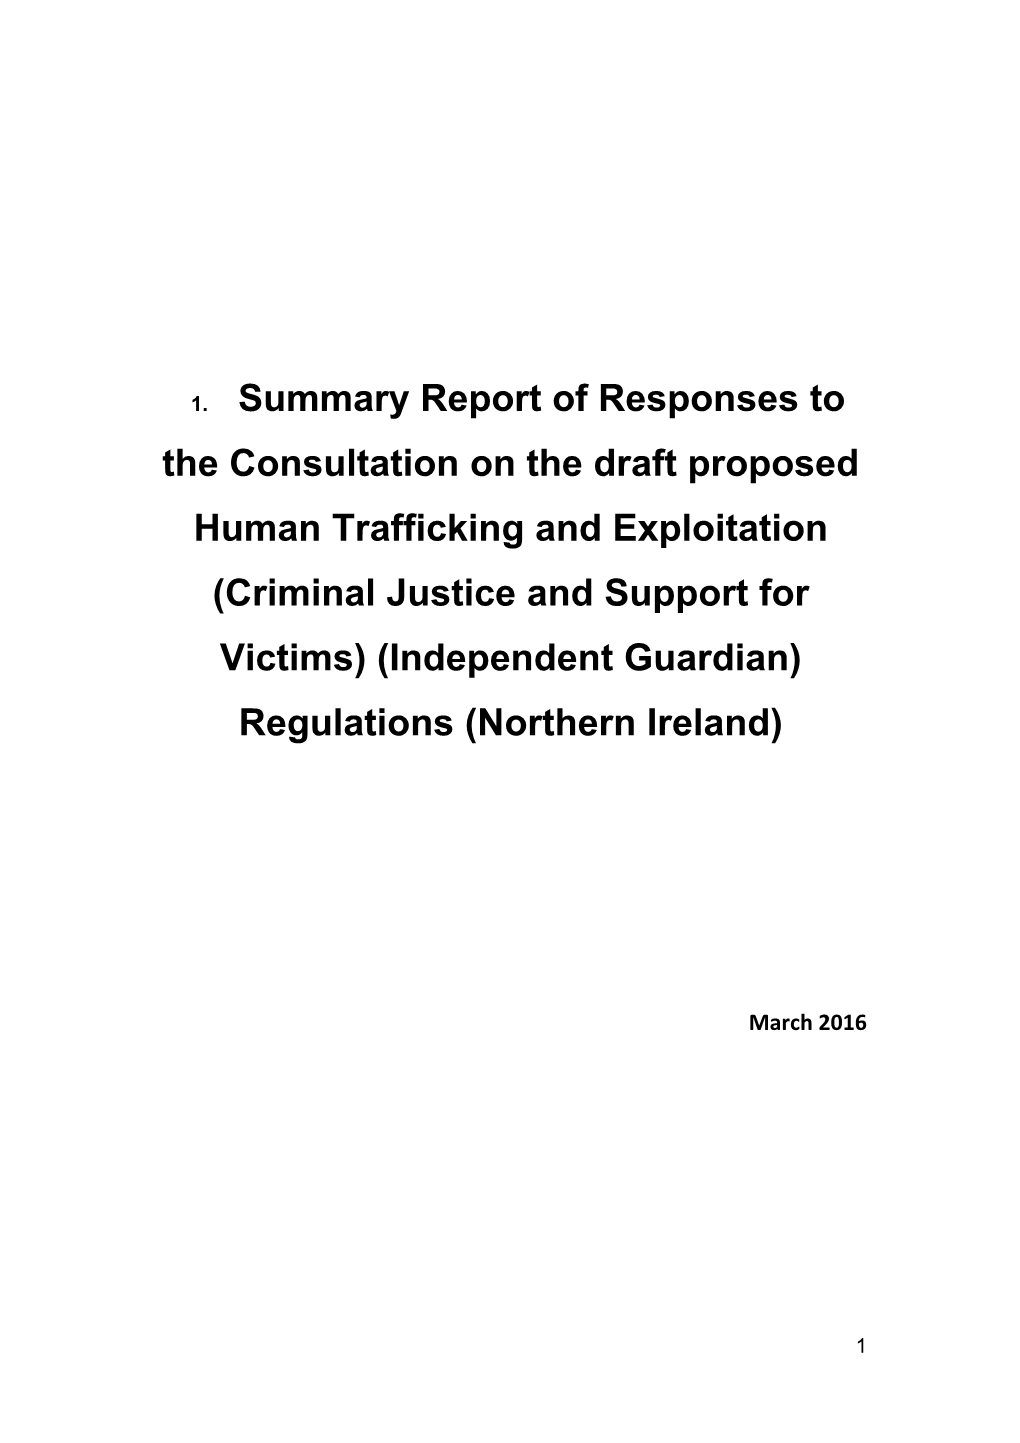 Summary Report of Responses to the Consultation on the Draft Proposed Human Trafficking